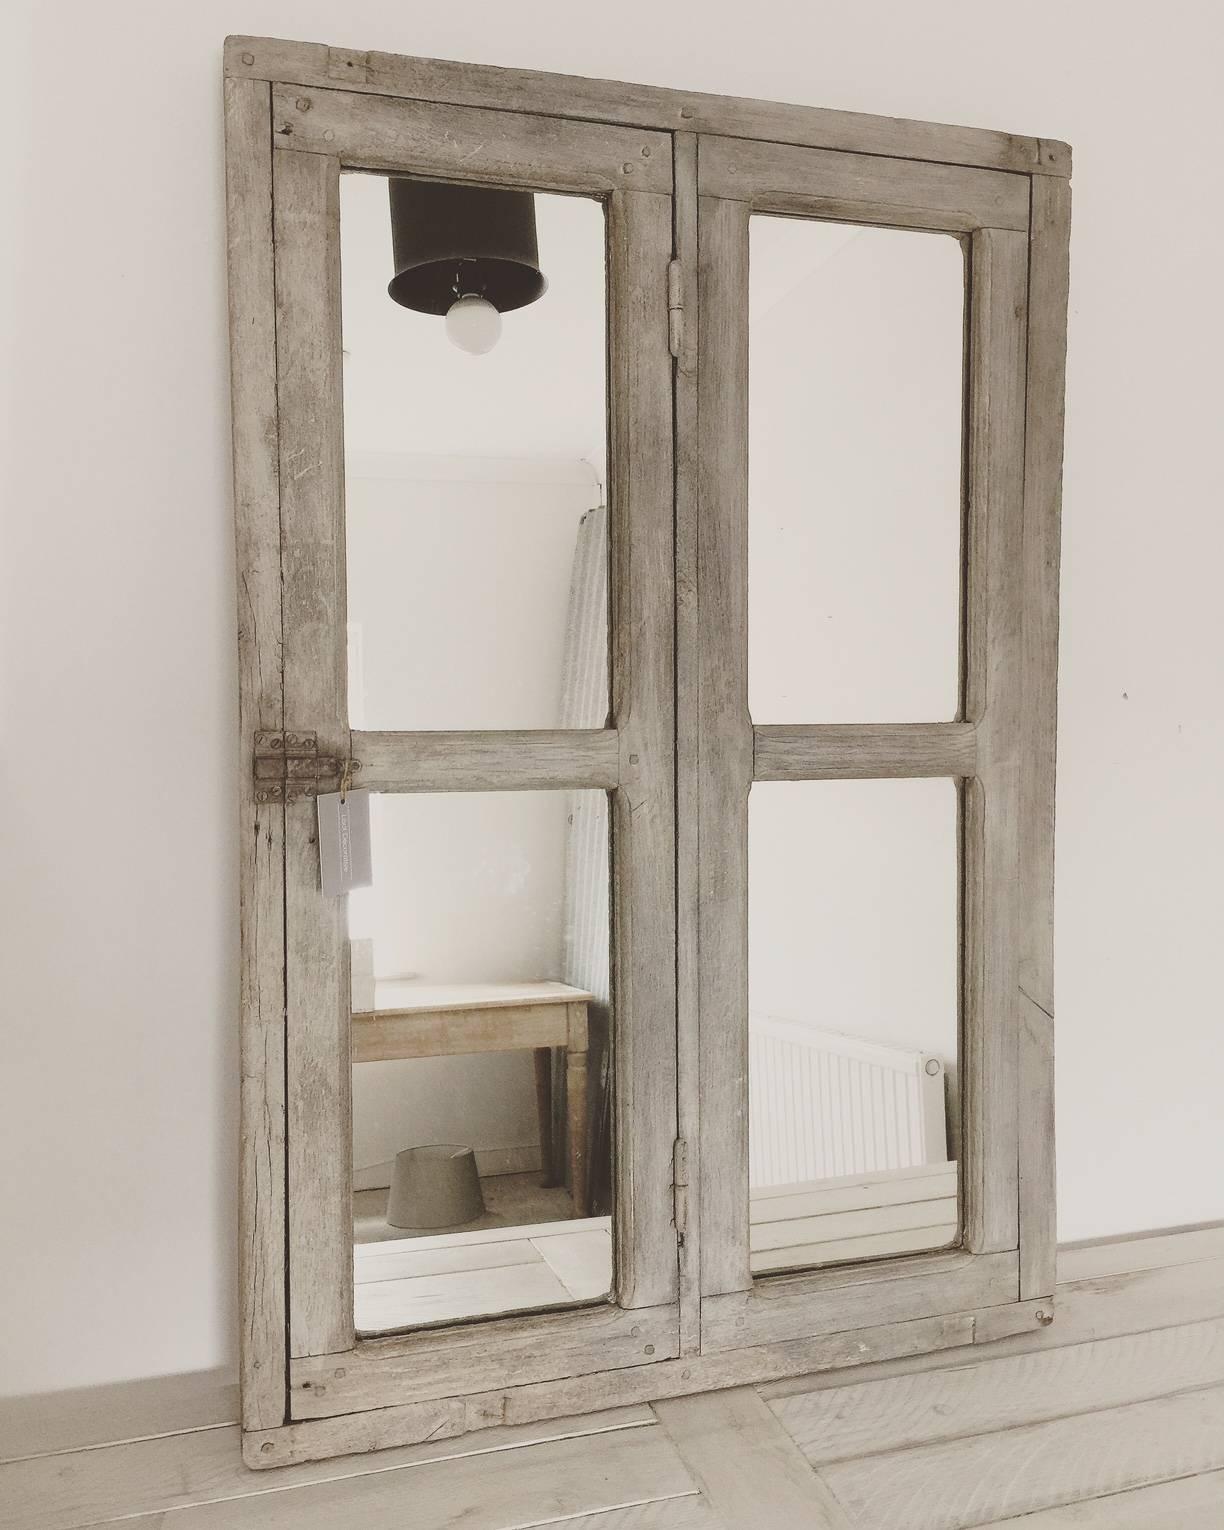 Antique Vintage French hardwood window frame converted into a stylish salvage reclamation architectural mirror .